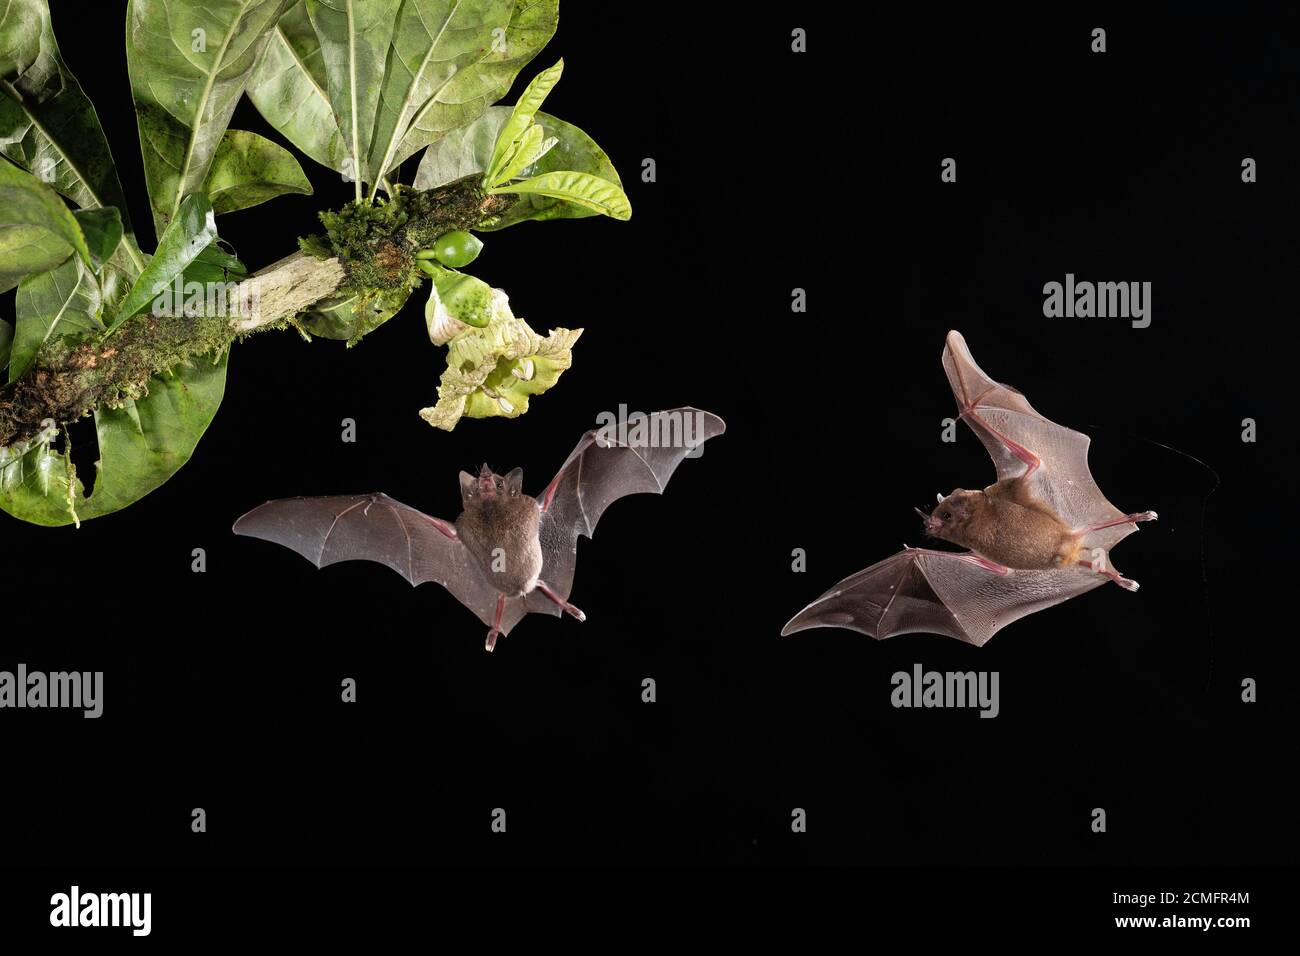 Two Pallas's long-tongued Bats (Glossophaga soricina) feeding on Calabash gourd flower (Crescentia cujete), lowland rainforest, Costa Rica Stock Photo